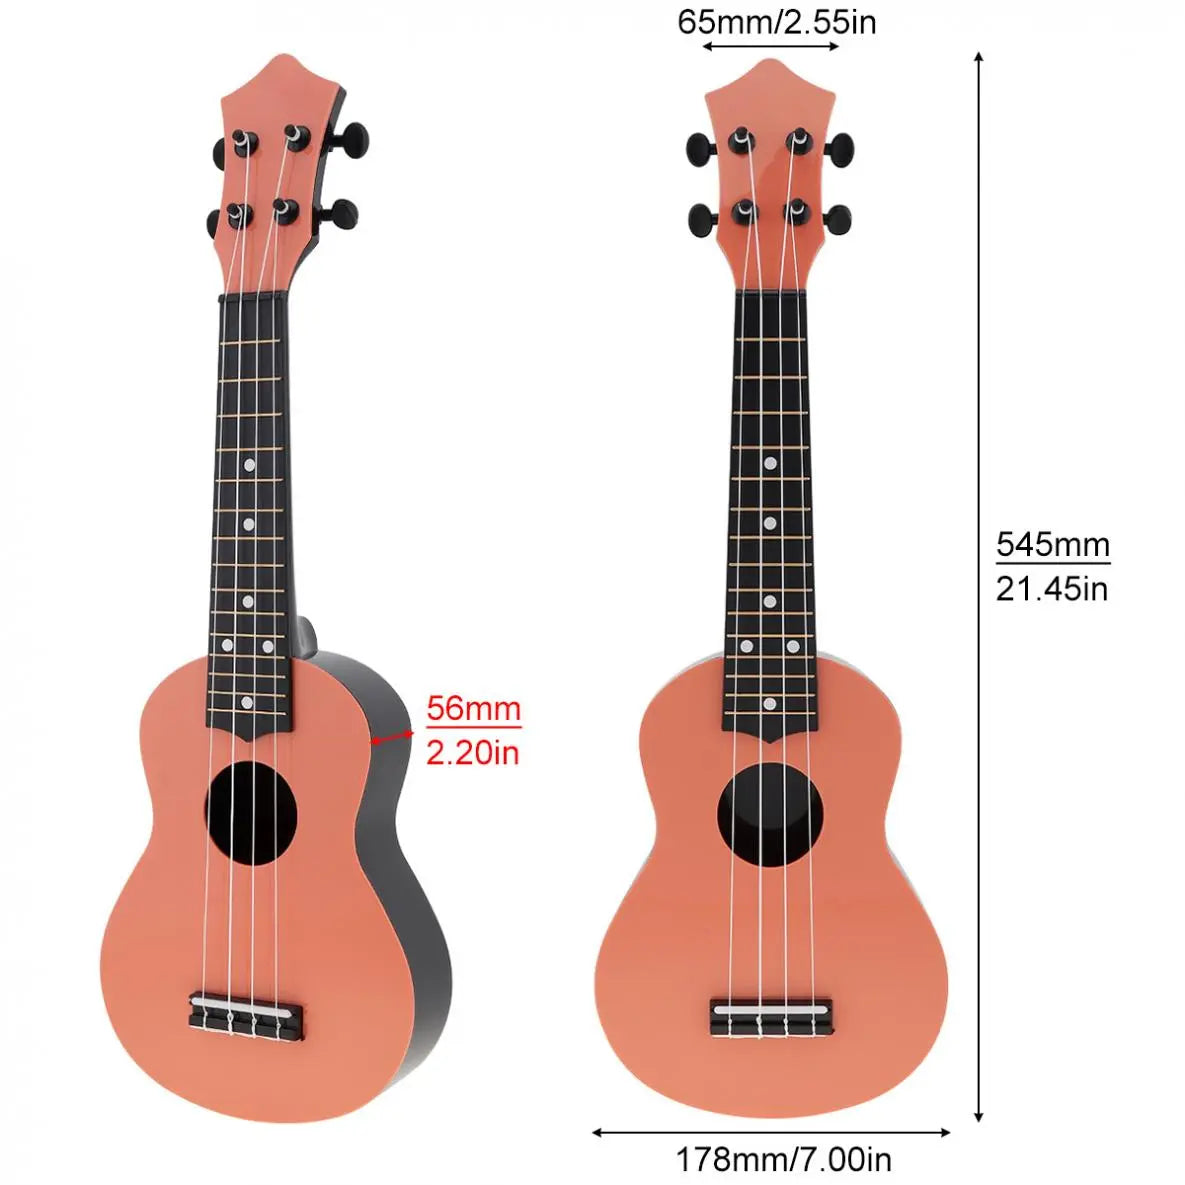 21-Inch Colorful Acoustic Soprano Ukulele with 4 Strings